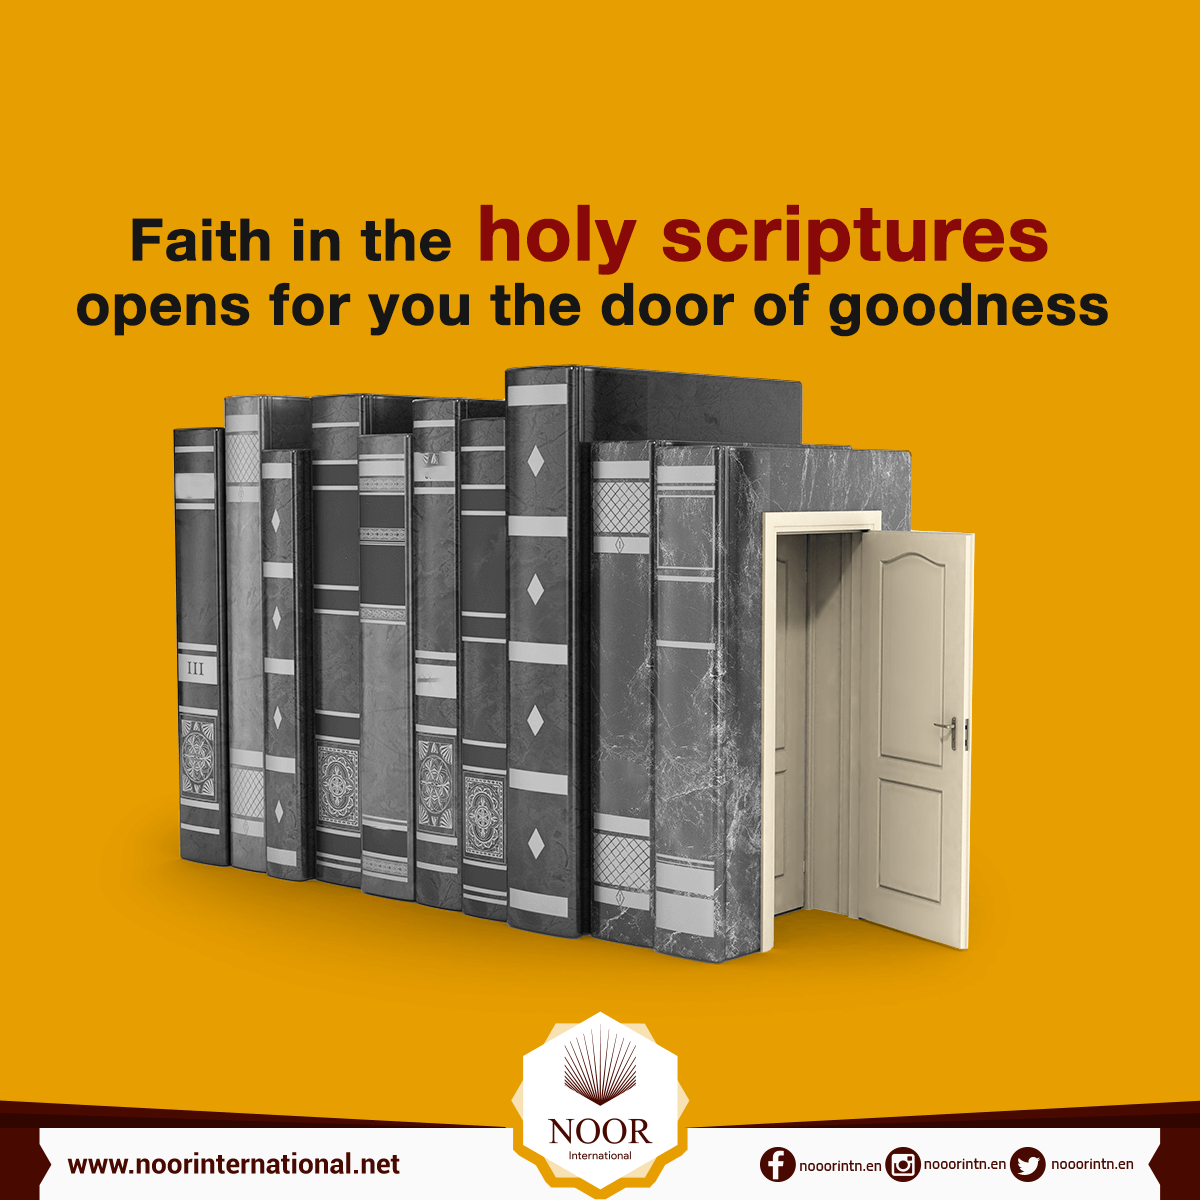 Faith in the holy scriptures opens for you the door of goodness